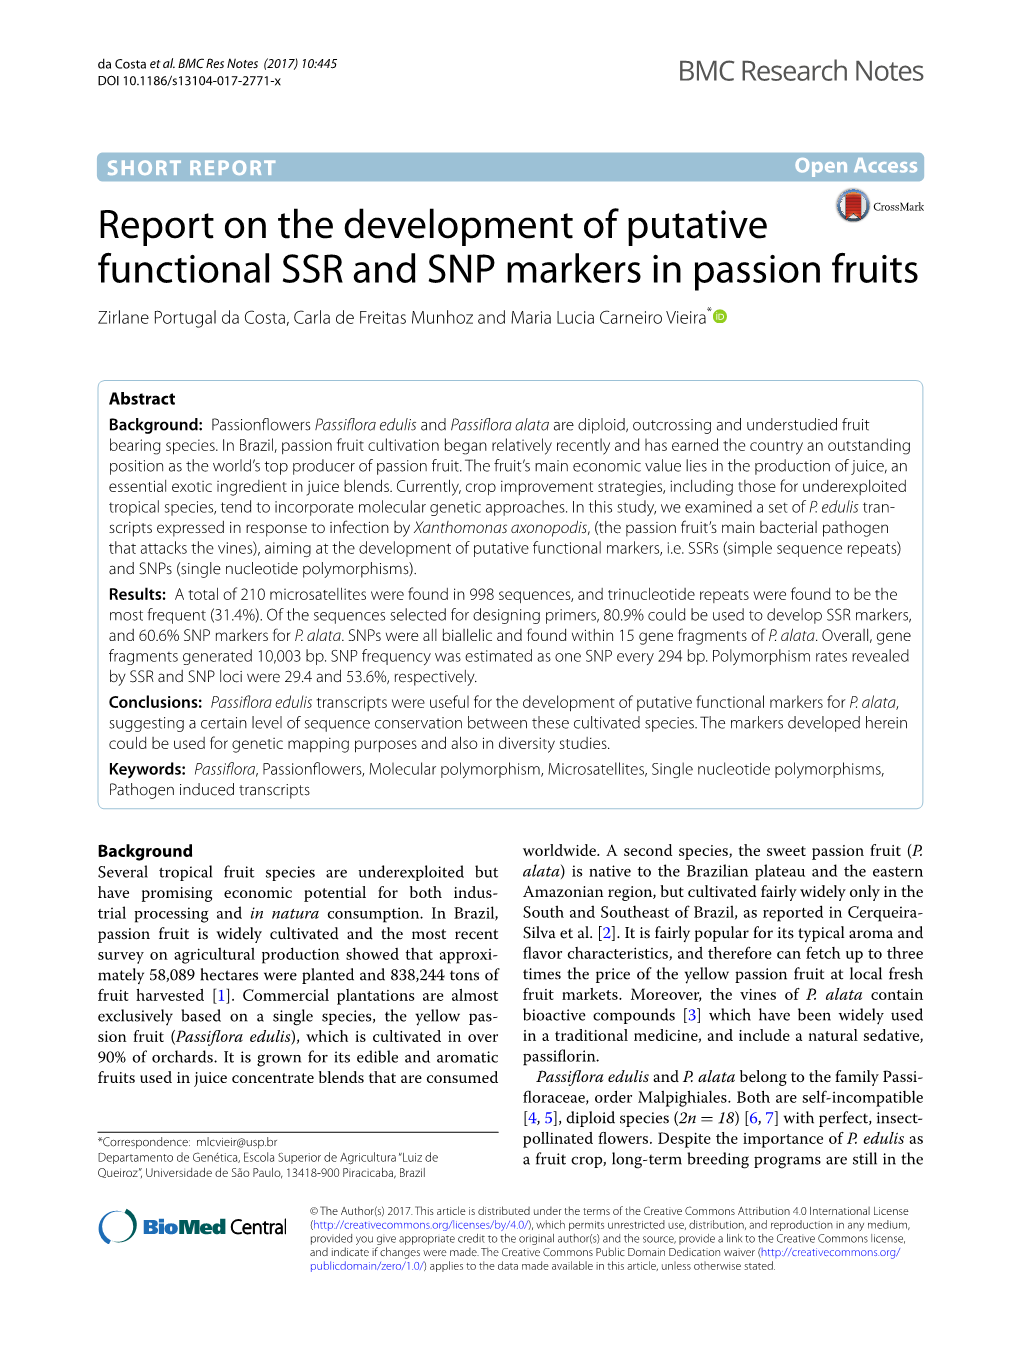 Report on the Development of Putative Functional SSR and SNP Markers in Passion Fruits